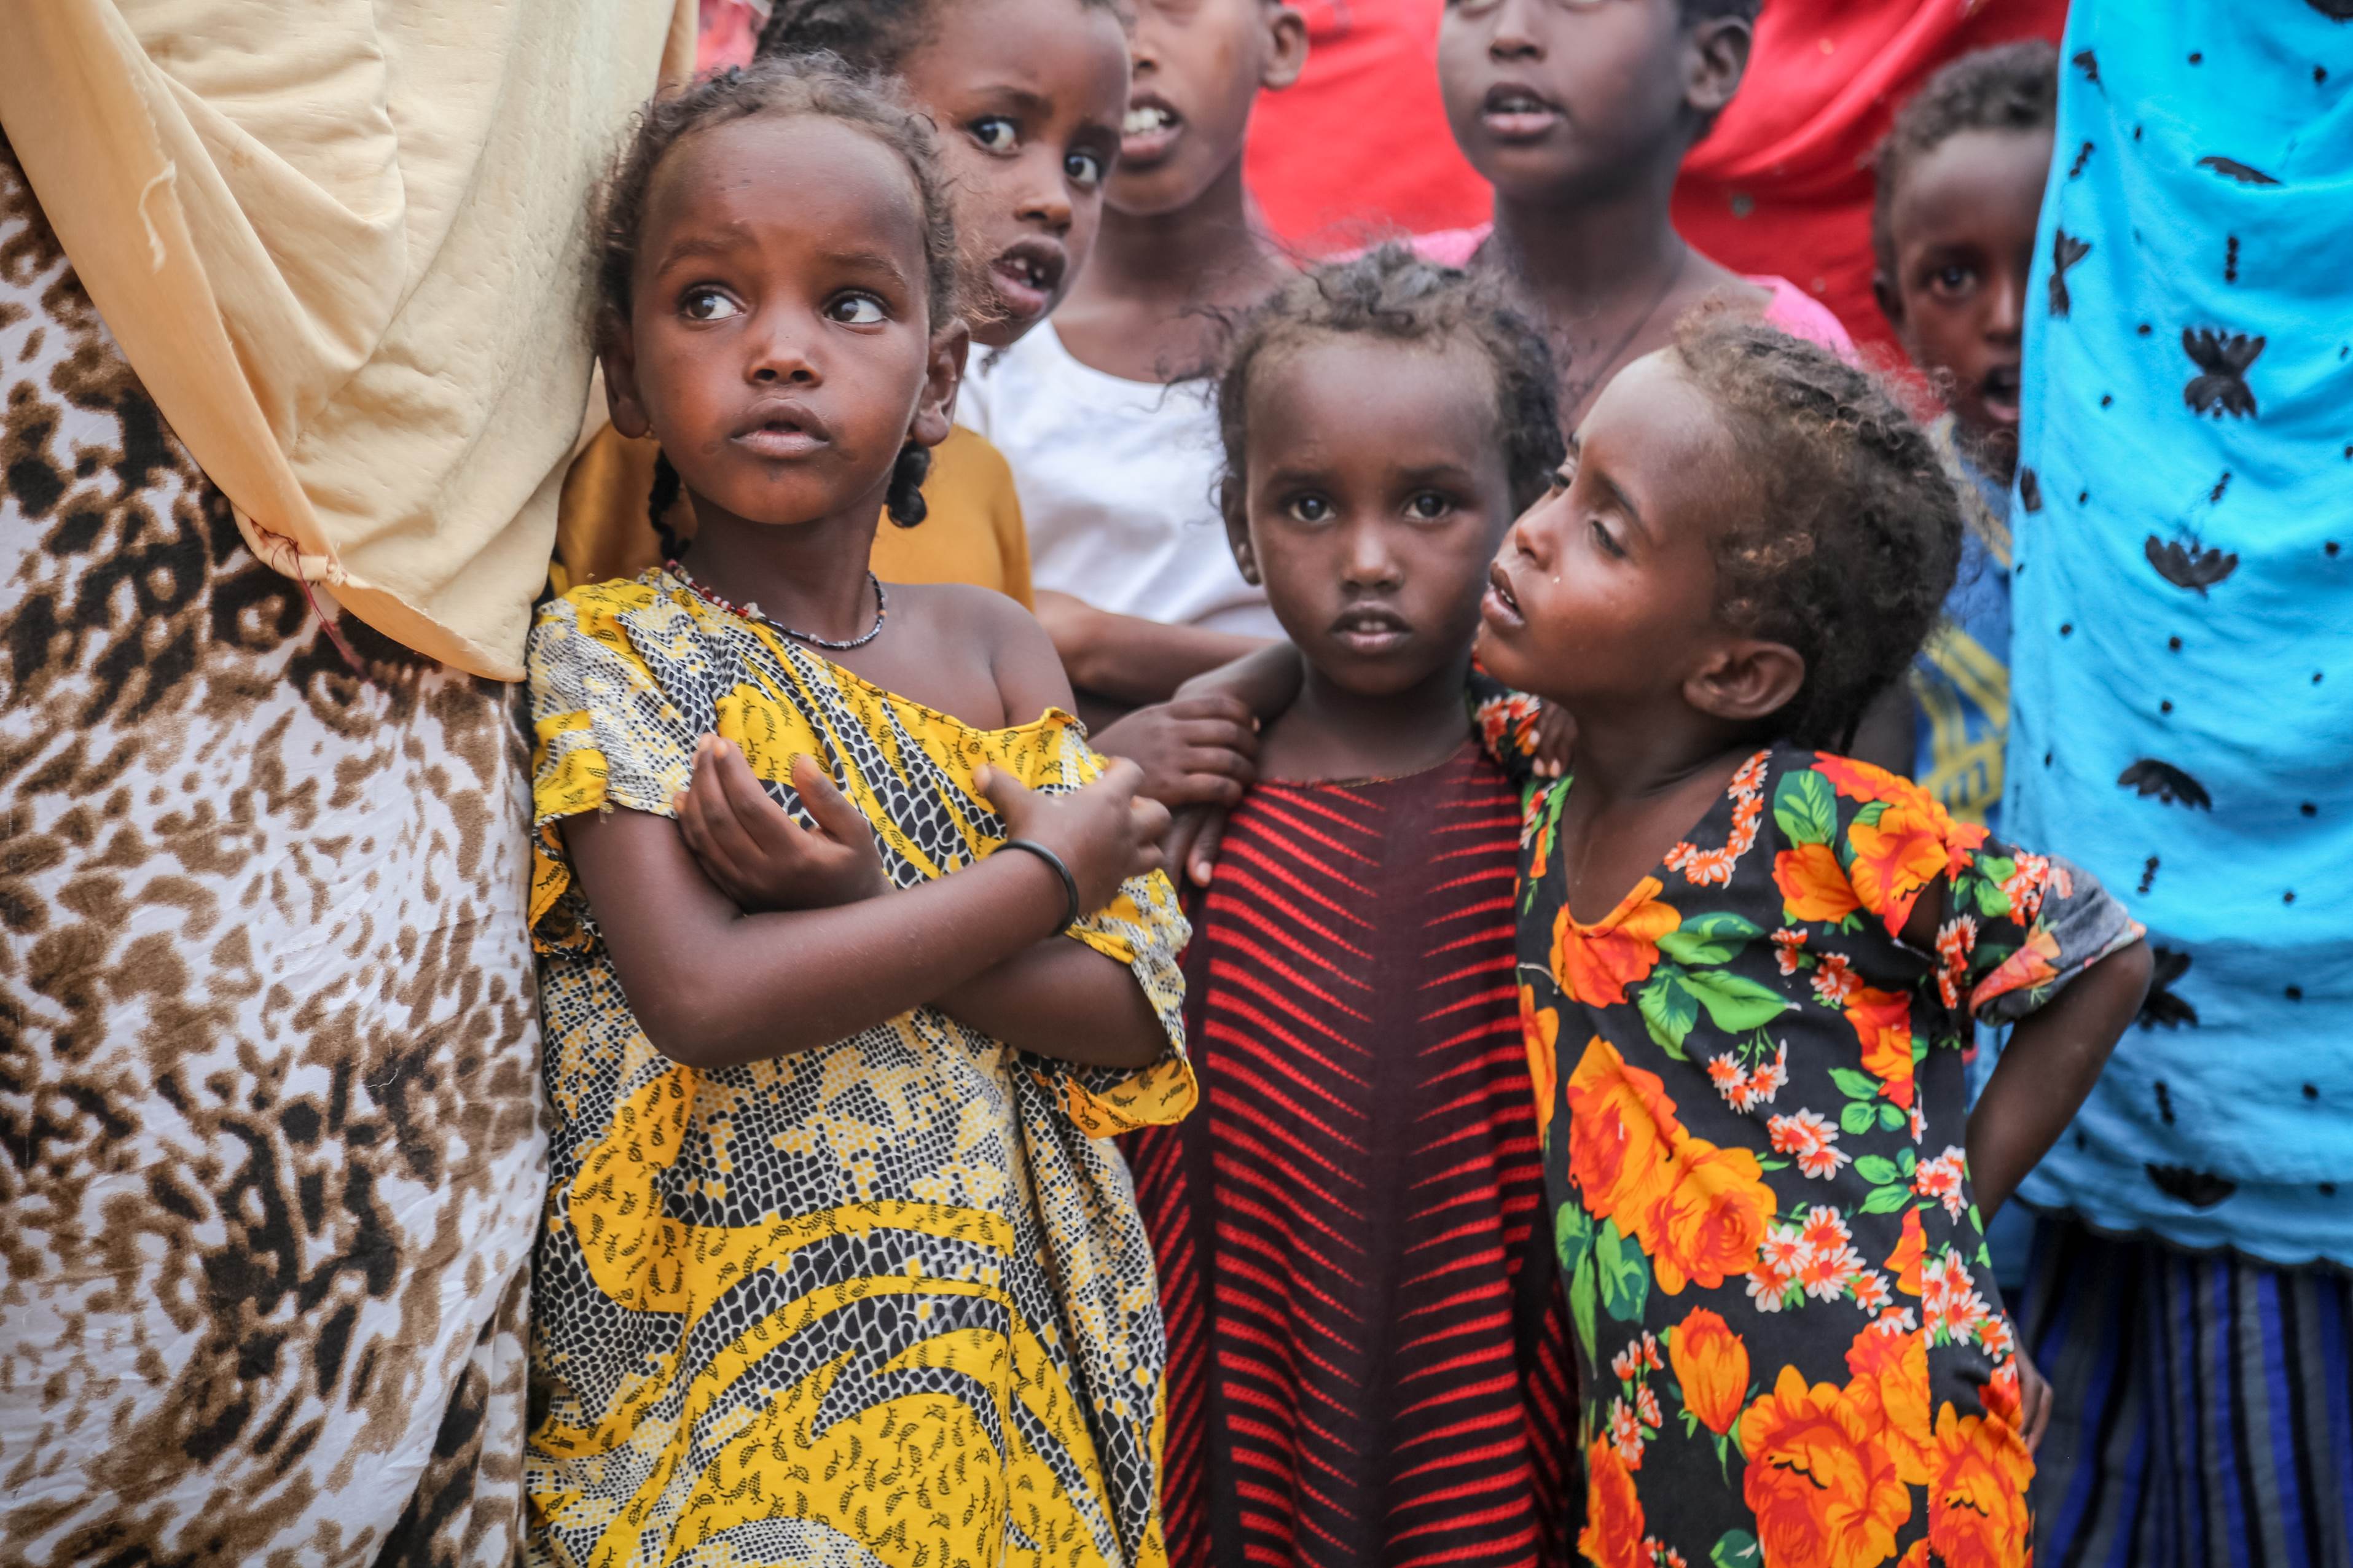 Three young hungry children in Somalia stand together in a crowd